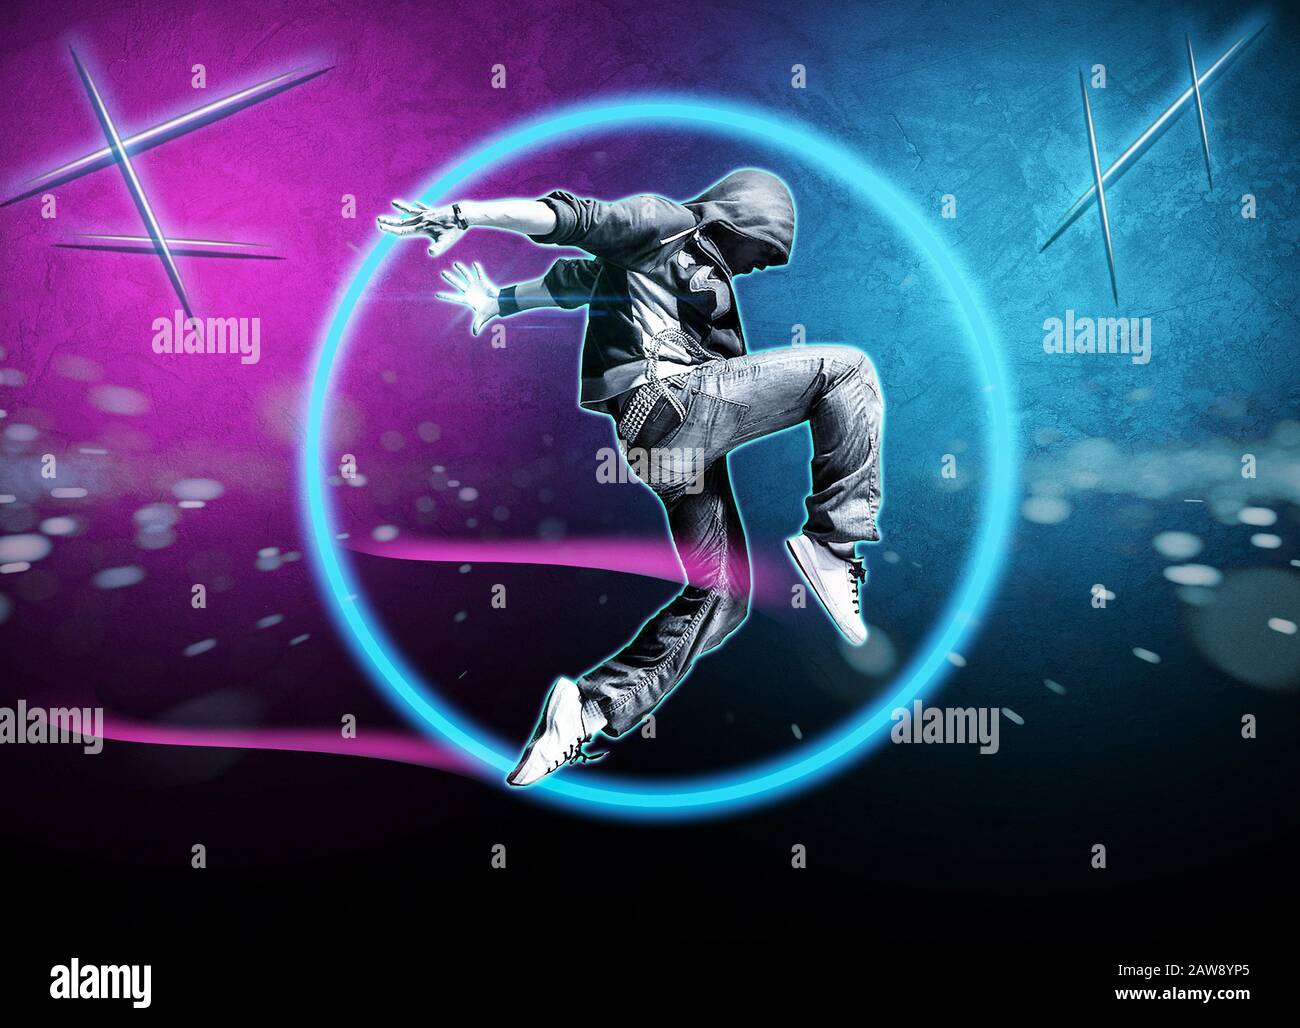 Young man jumping, neon lights in the background. Abstract art Stock Photo  - Alamy